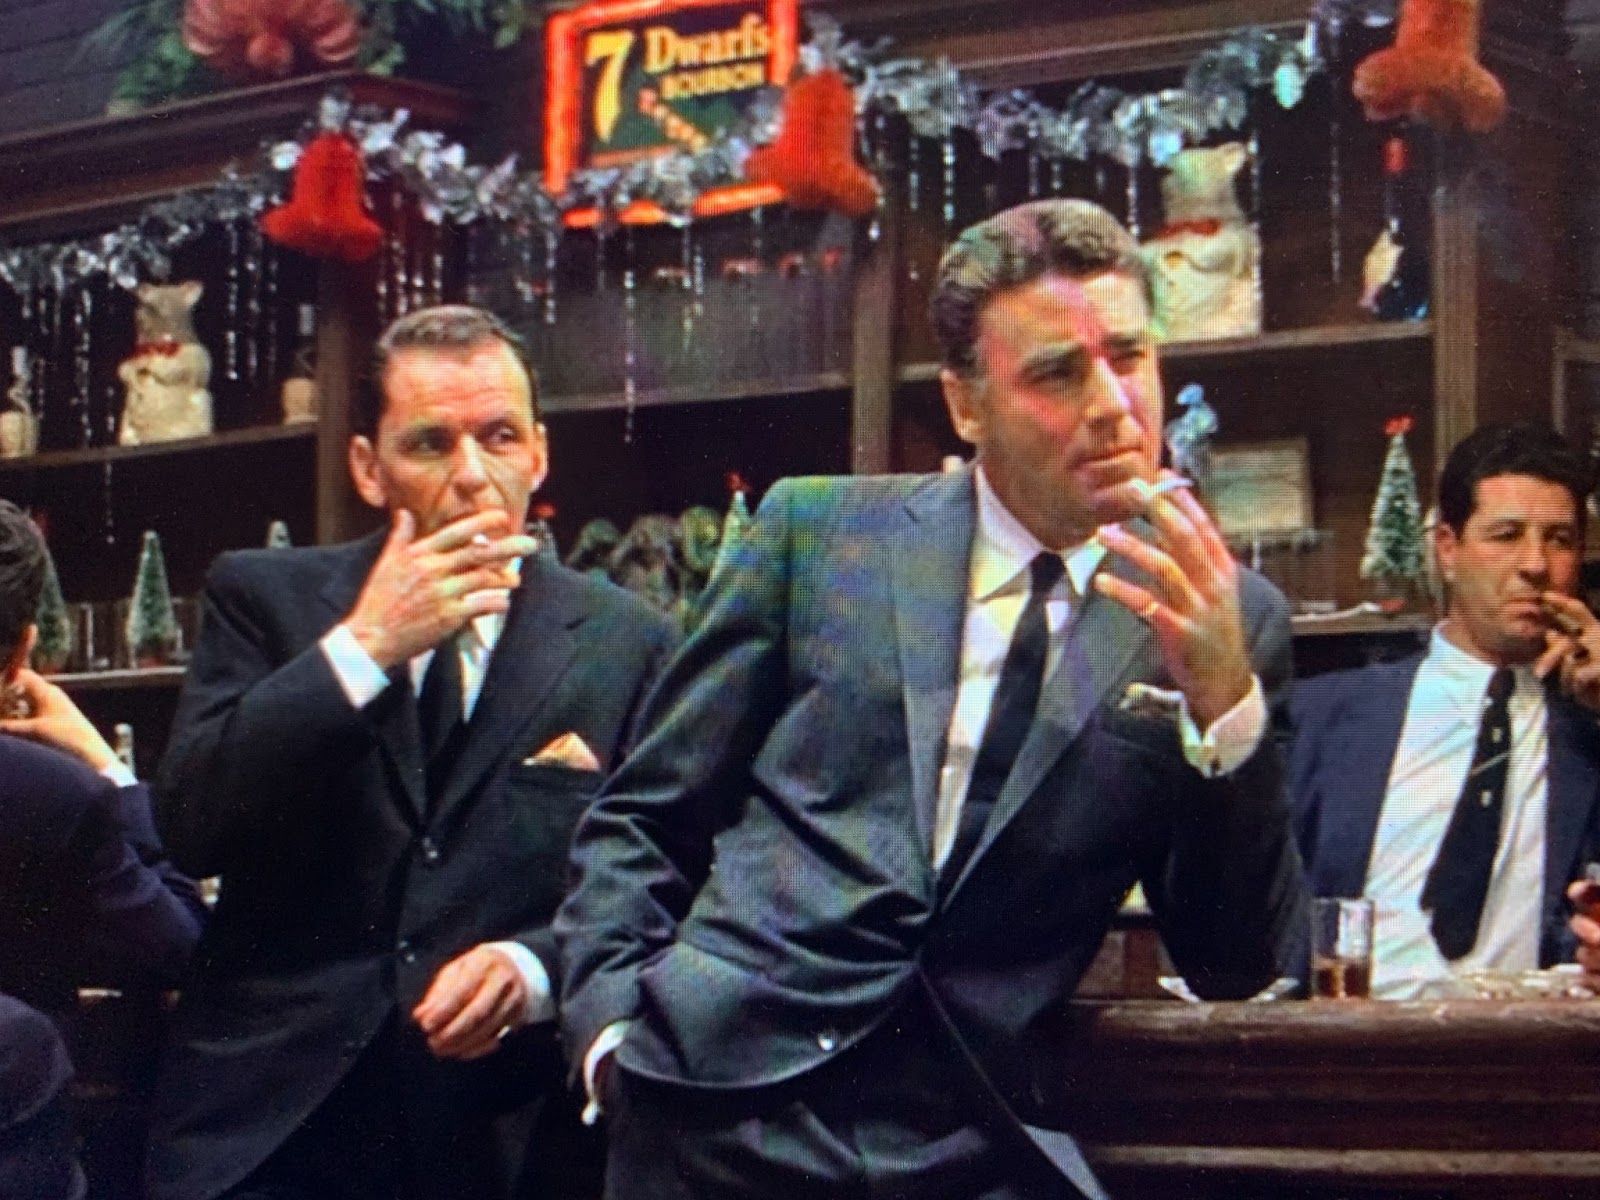 Peter Lawford, in a dark suit with a thin black tie, leans with his right hand in his hip pants pocket, his left elbow on the bar, and a cigarette held at chin level between the index and middle of the otherwise splayed and slightly curved fingers of his left hand. He has a pinky ring. Just behind him, to the left, Frank Sinatra in a darker suit, three-buttoned, with a peach-colored pocket square, white shirt, and dark tie, leans his left elbow on the bar and takes a drag on a cigarette tucked between the fingers of his splayed right hand. Both are looking off to their left. The smoking gestures help highlight both of their well-shot cuffs, Lawford's being French with a visible cufflink. Behind them the bar is hung with silver tinsel and red crepe-paper bells over a sign that reads "7 Dwarfs Bourbon." The bartender, at the right of the frame in an unbuttoned suit jacket, is facing the same way and has a cigarette raised to his mouth in his left hand.  